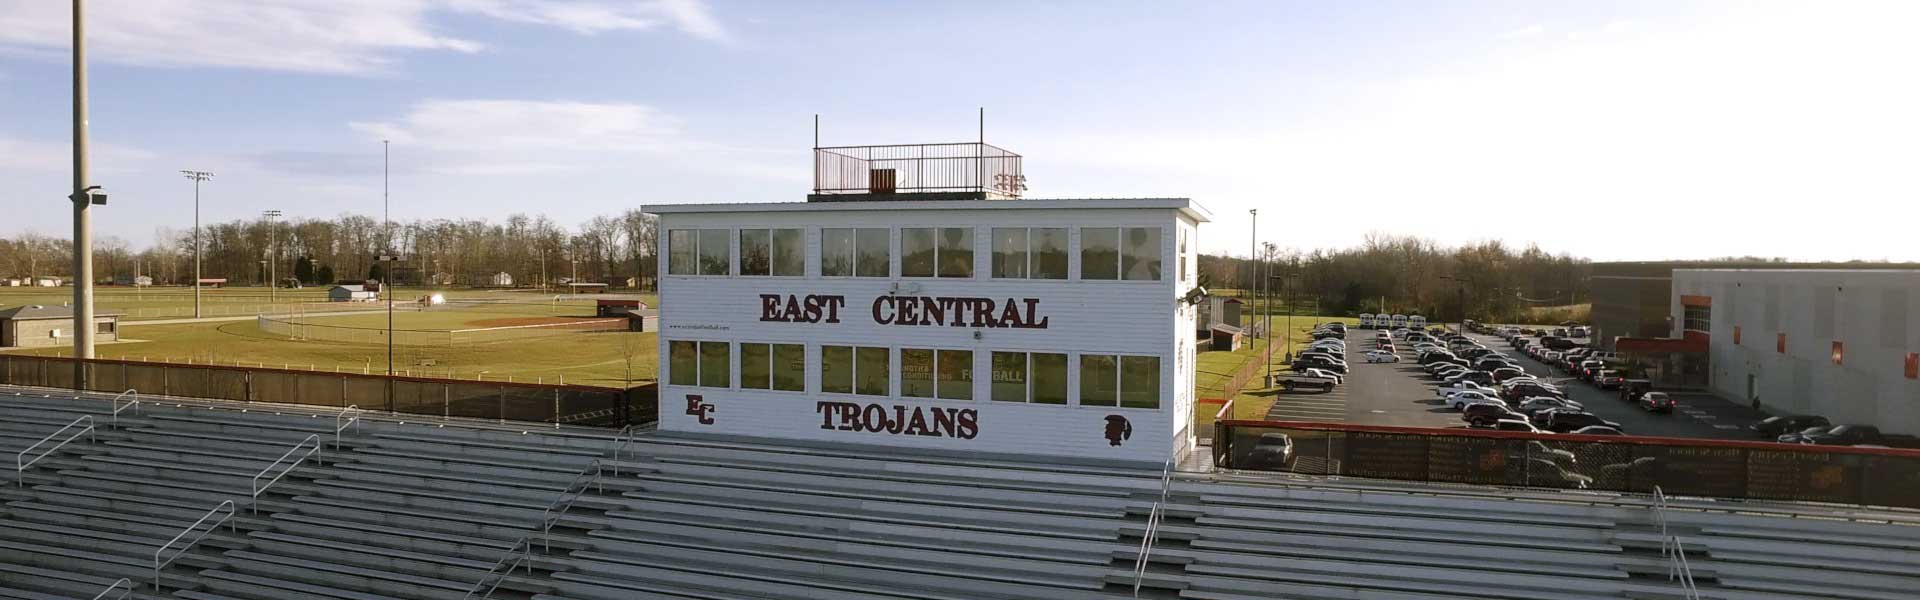 Front View of East Central High School Press Box